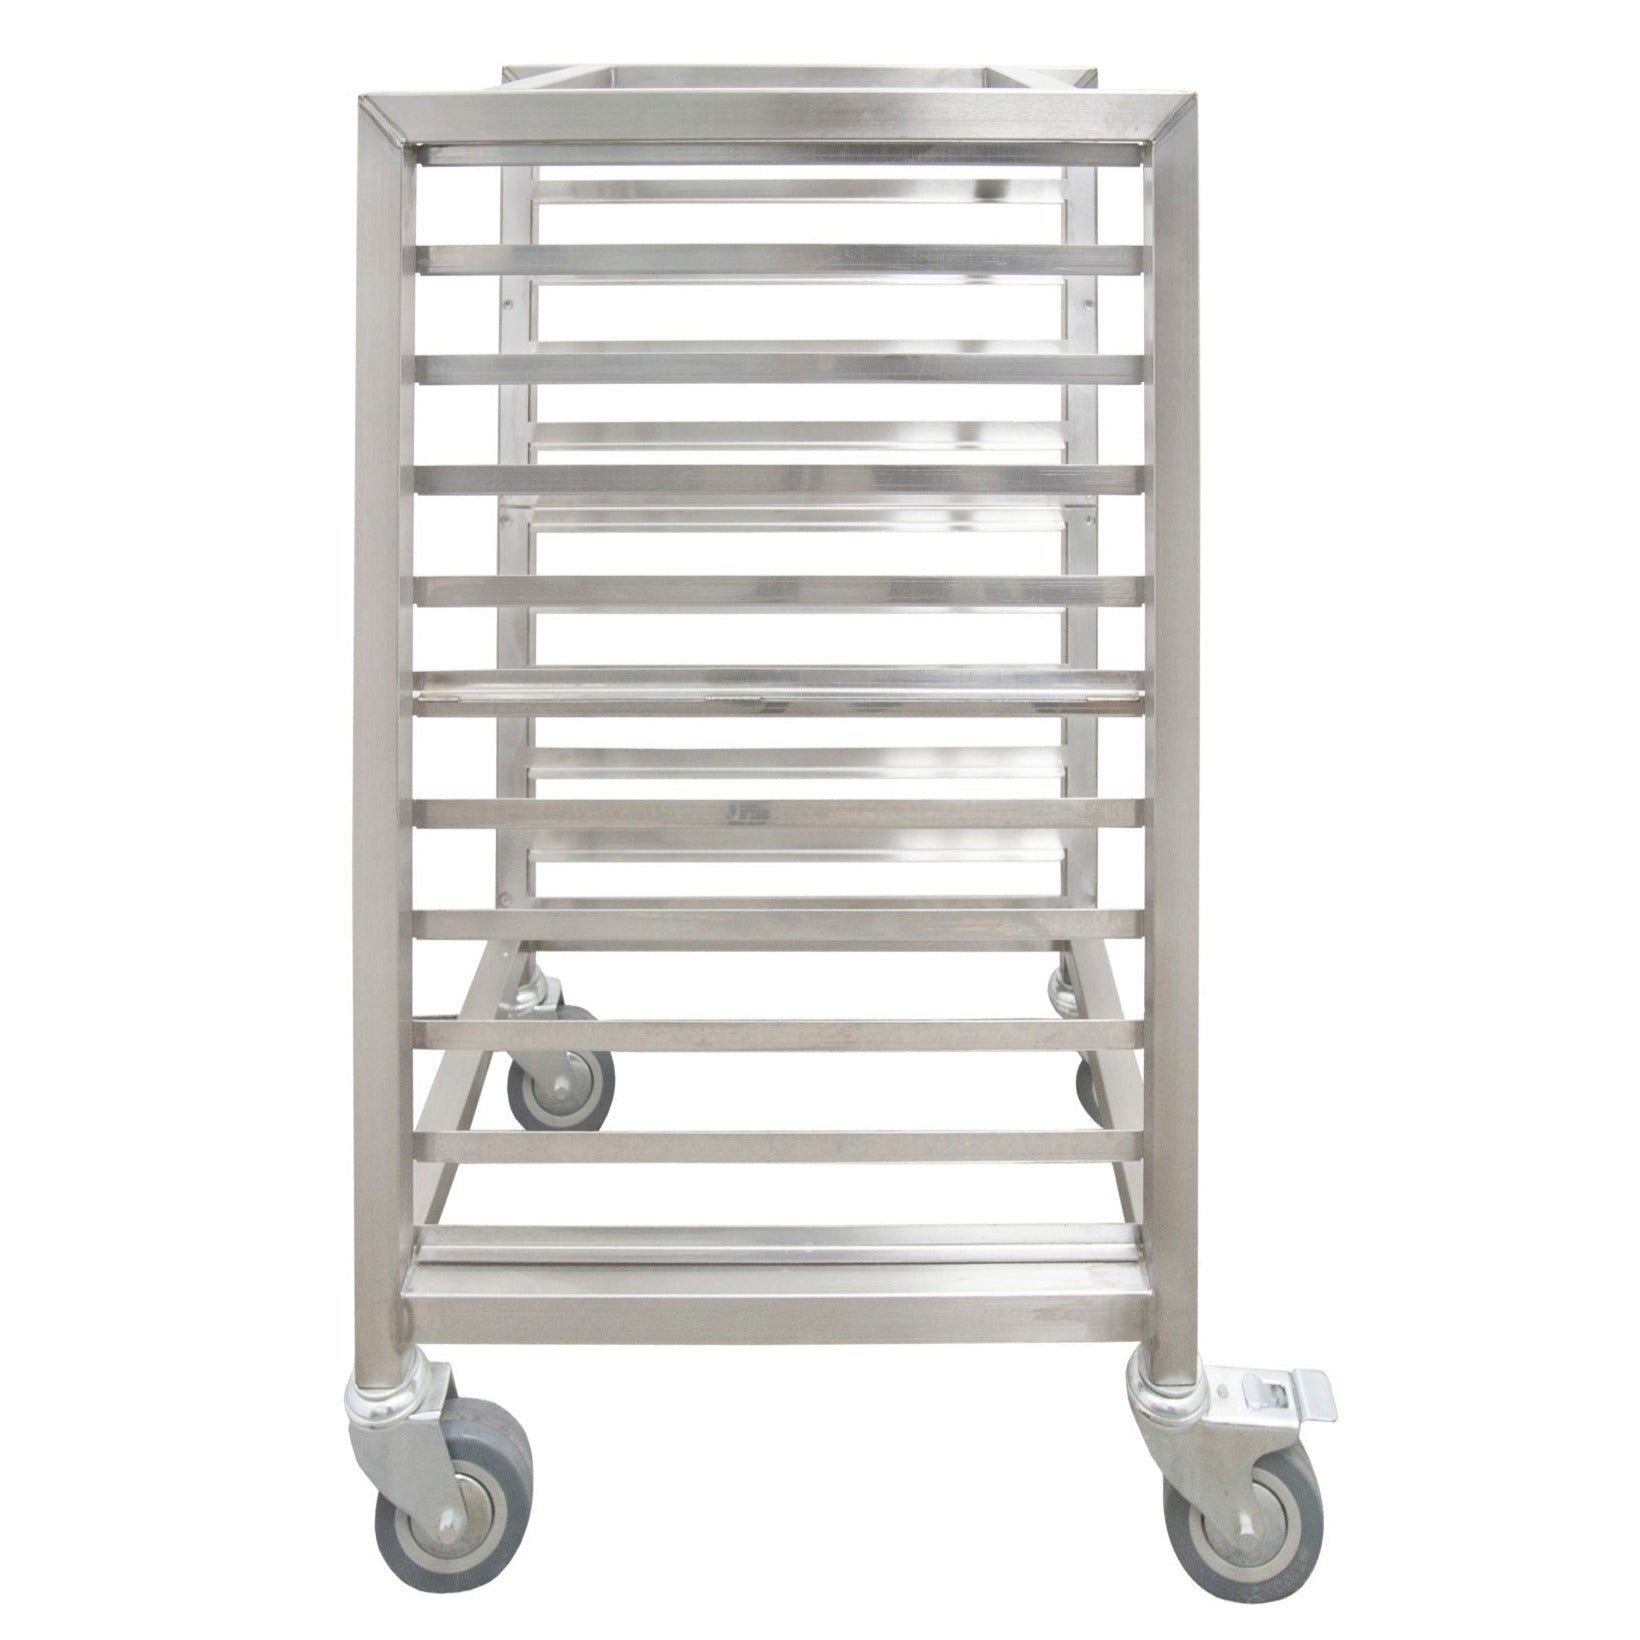 Stainless steel 10-Tier GN Trolley SCT900